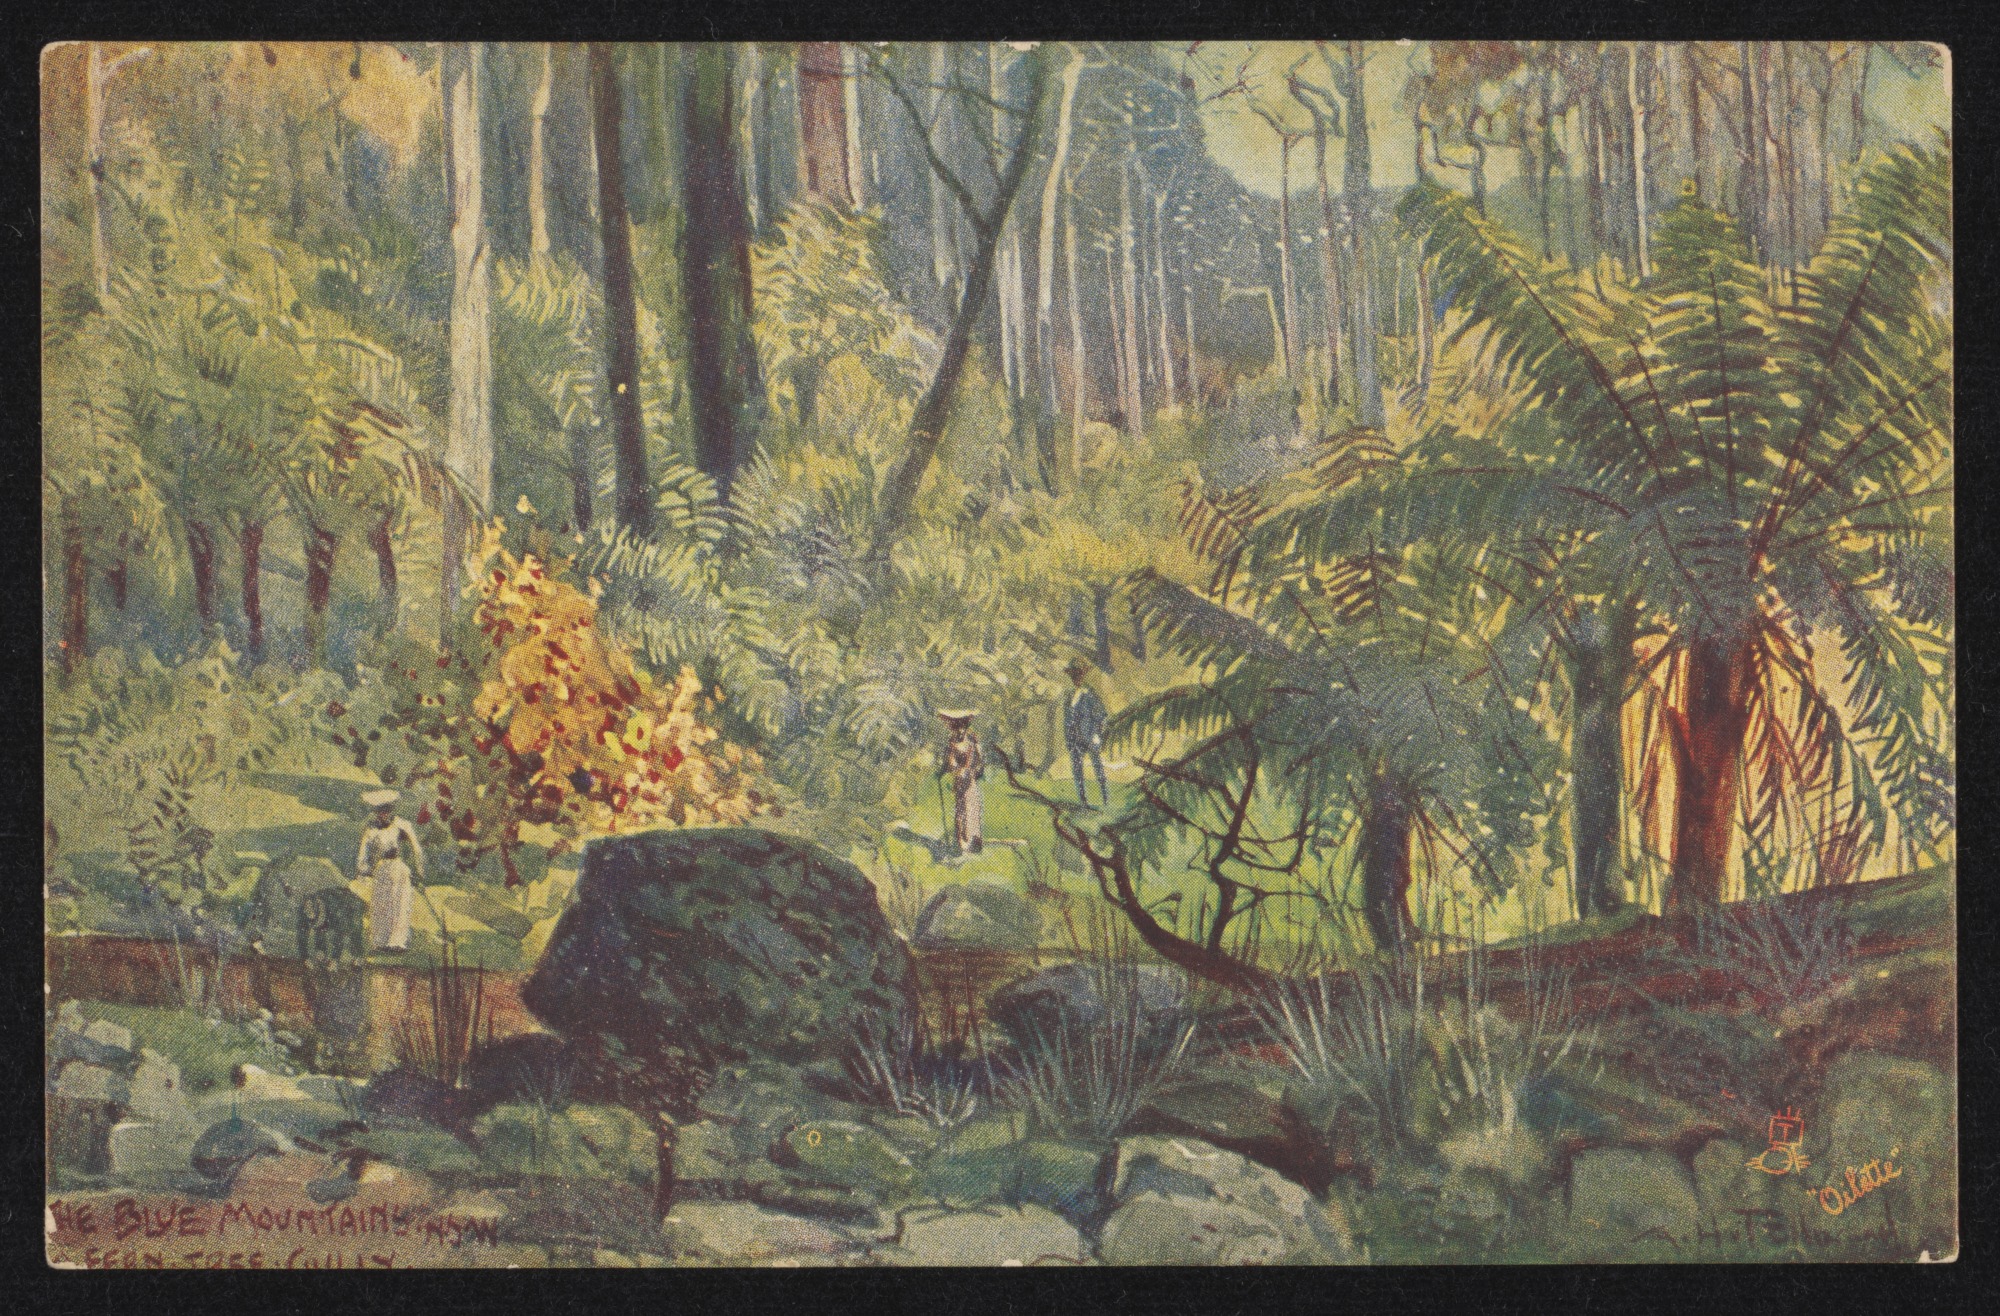 A postcard showing Fern Tree Gully in the Blue Mountains 